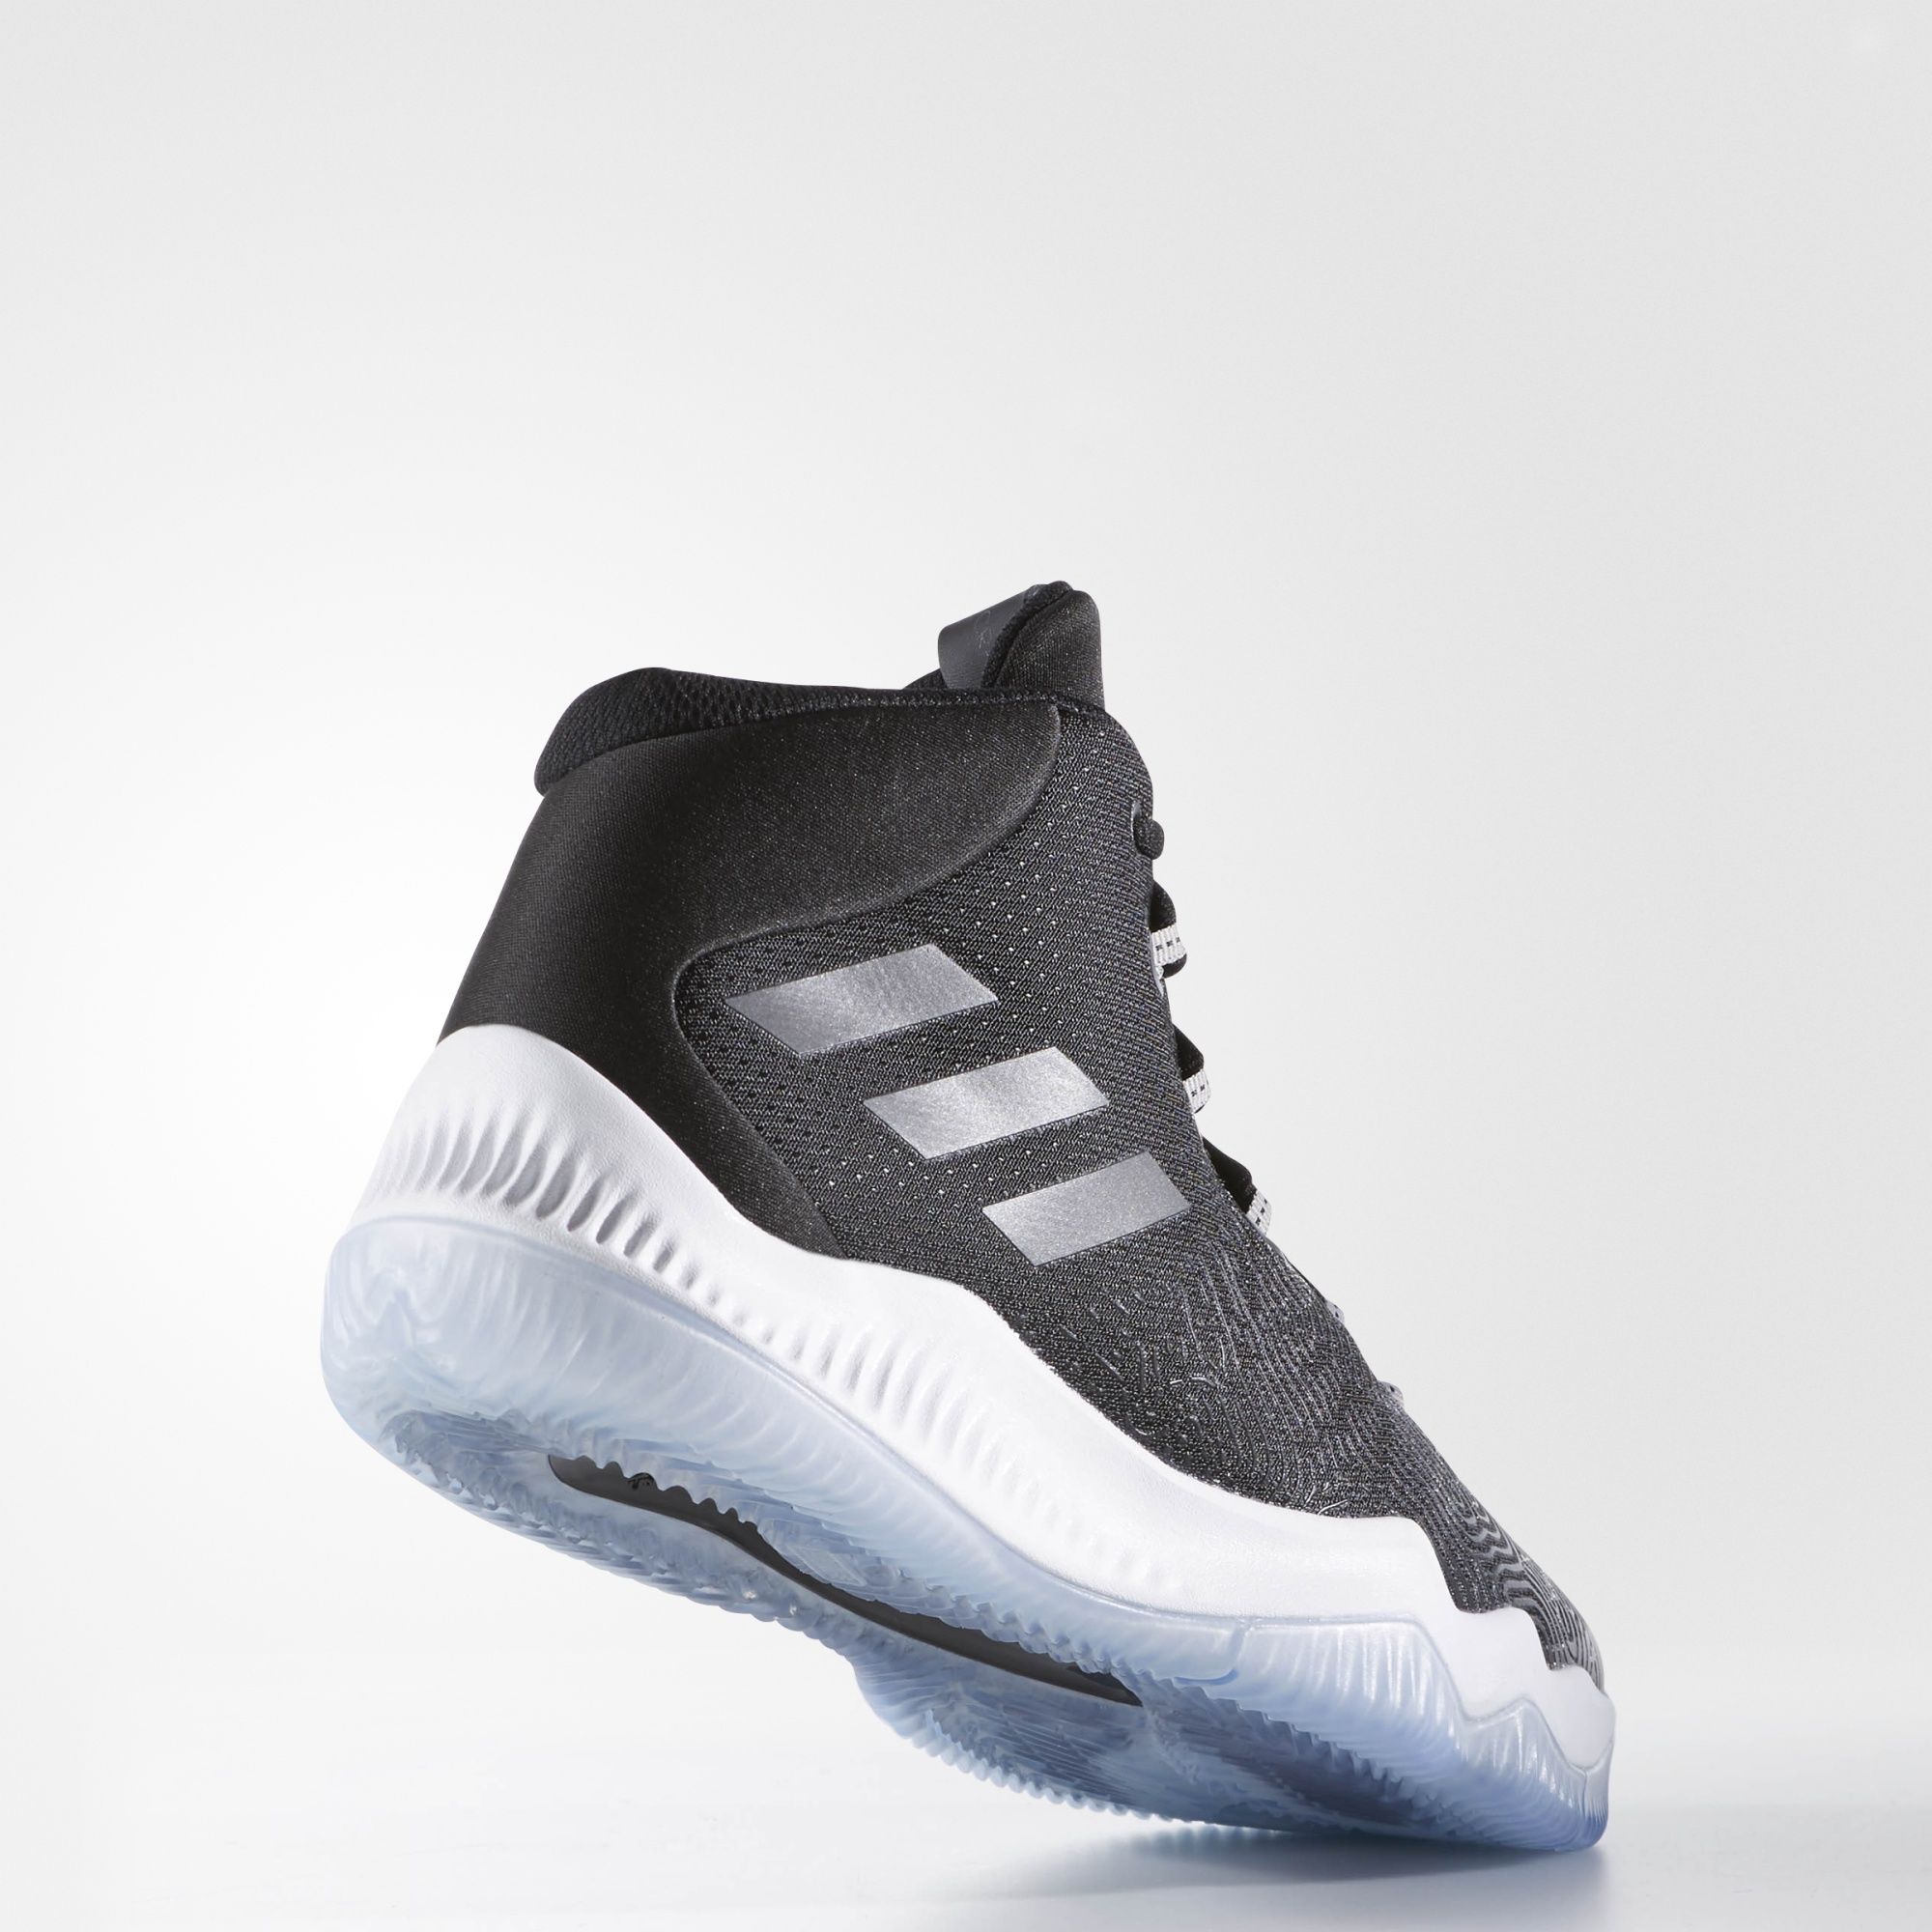 Hustle on the Court with the adidas Crazy Hustle - WearTesters مقاس الكلوت بالارقام